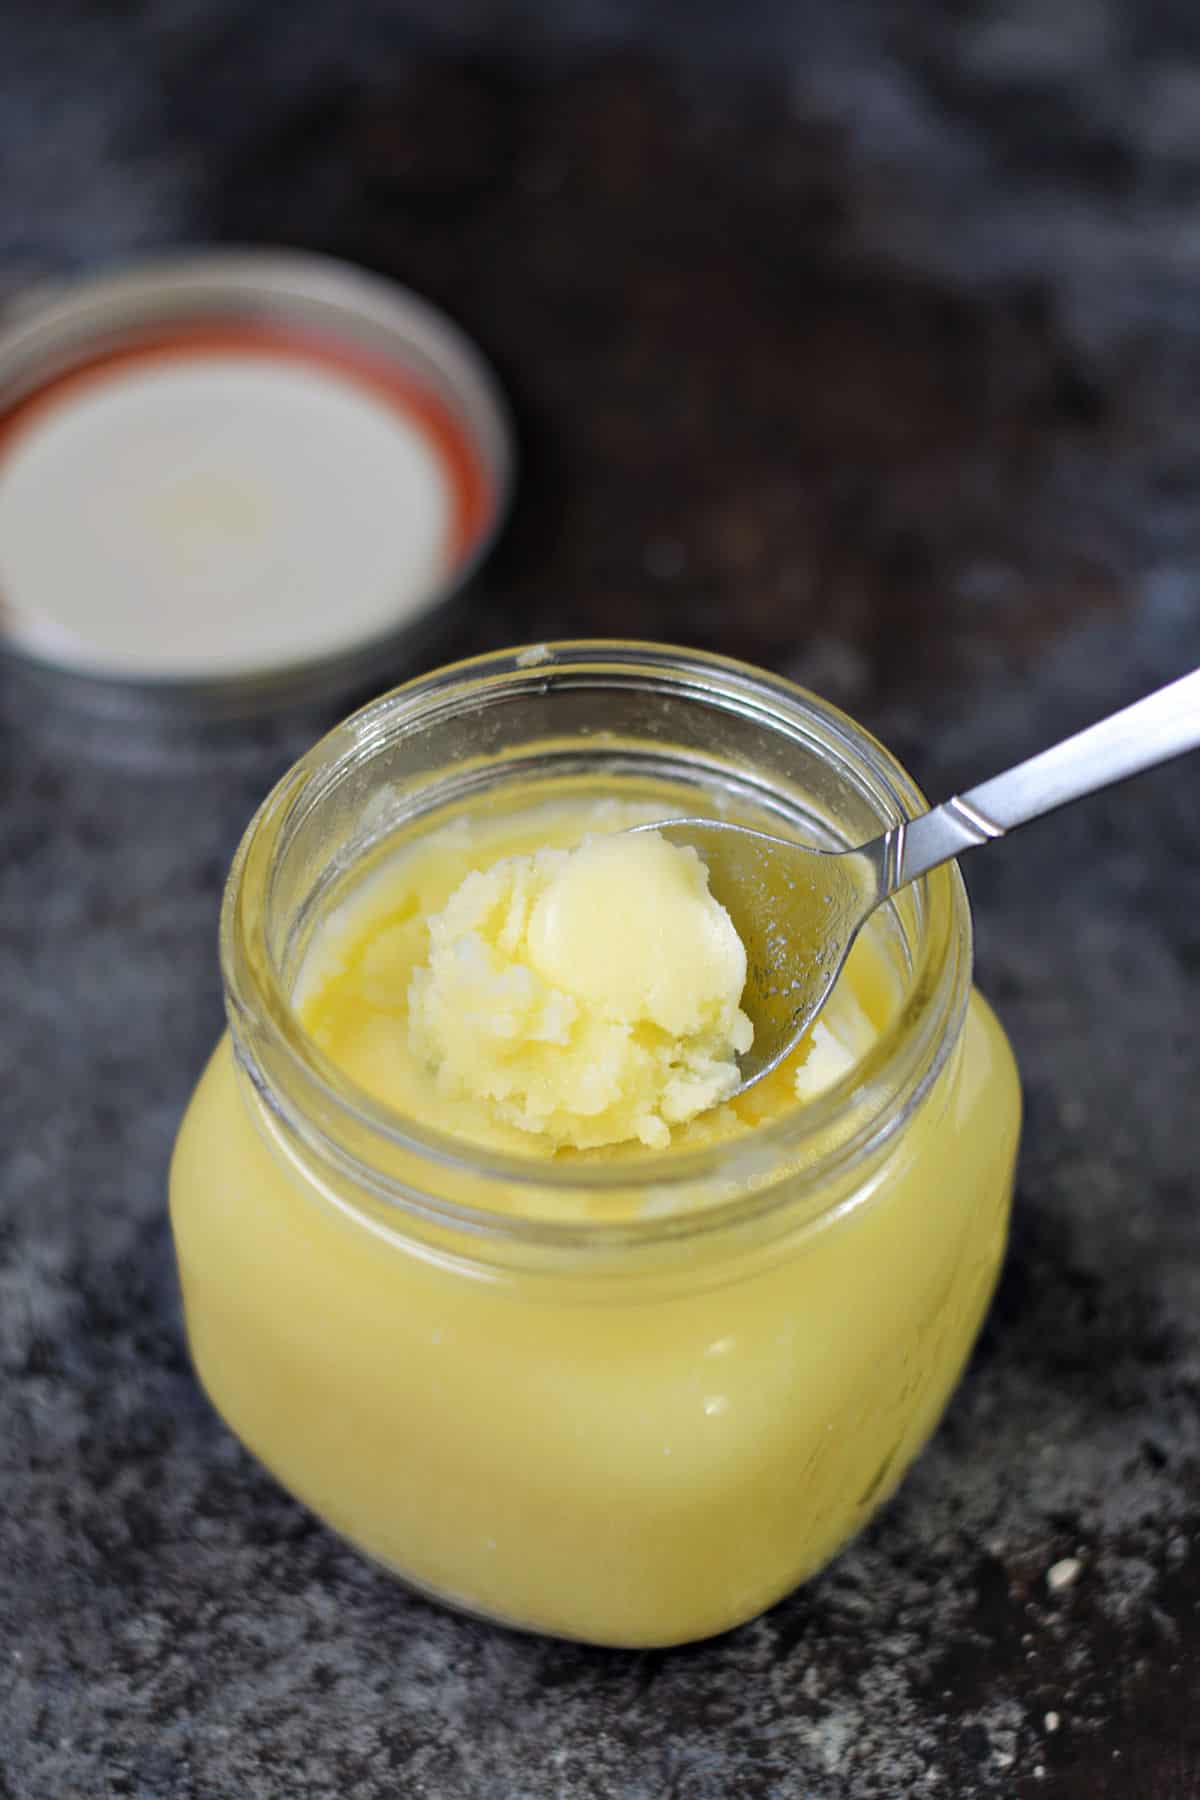 Clarified butter scooped with a spoon in a small jar.